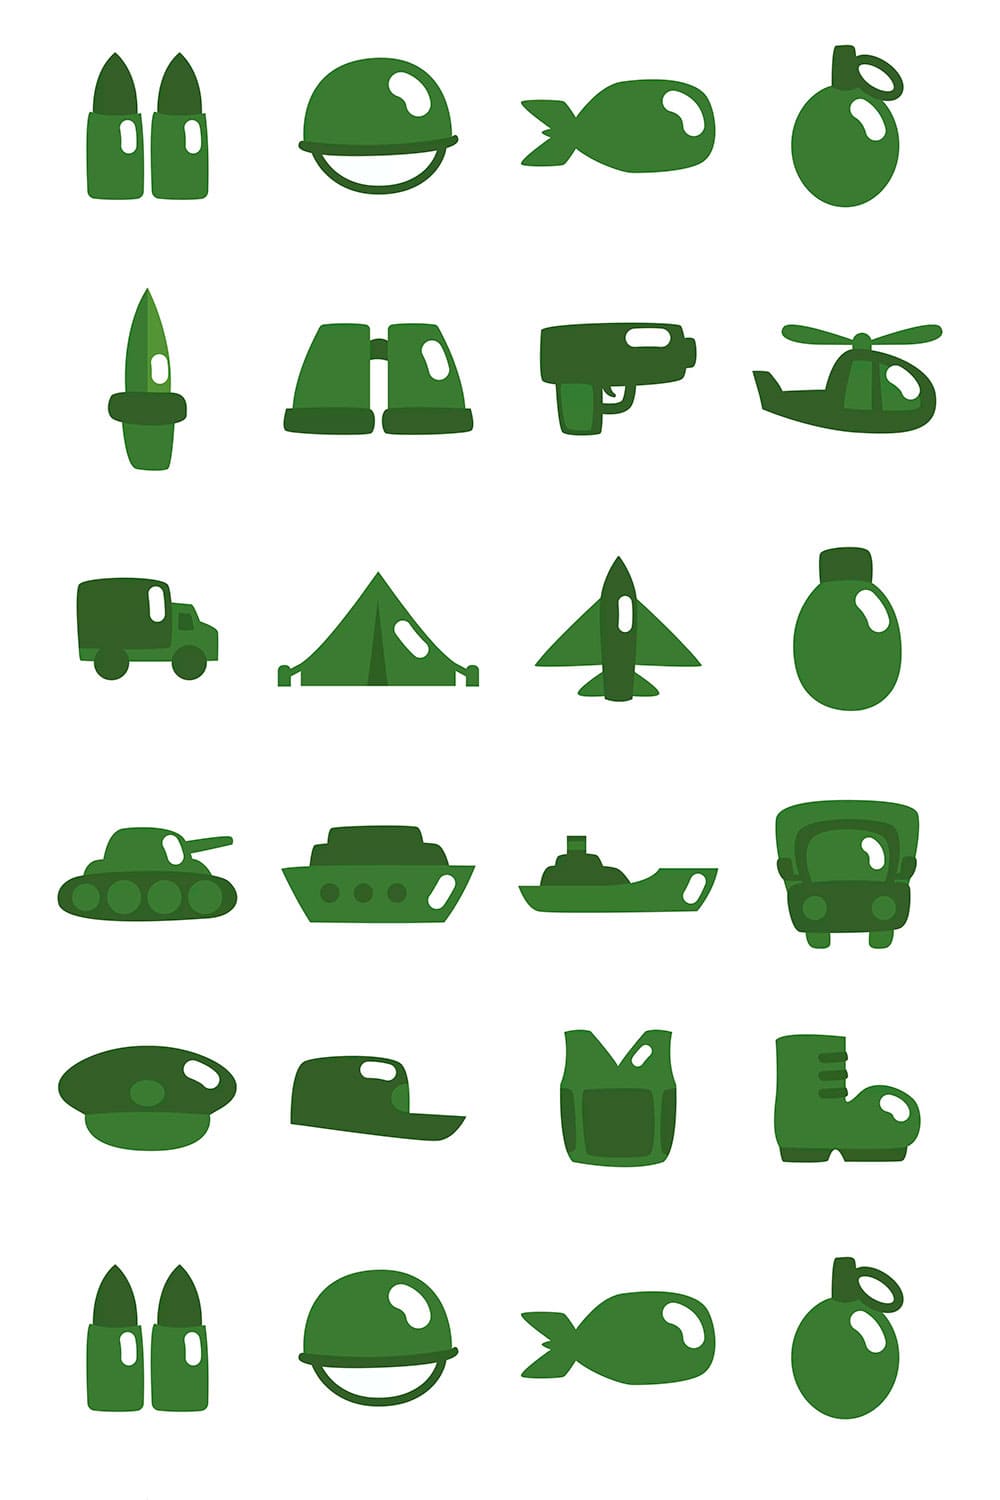 20 green military icons set, picture for pinterest.